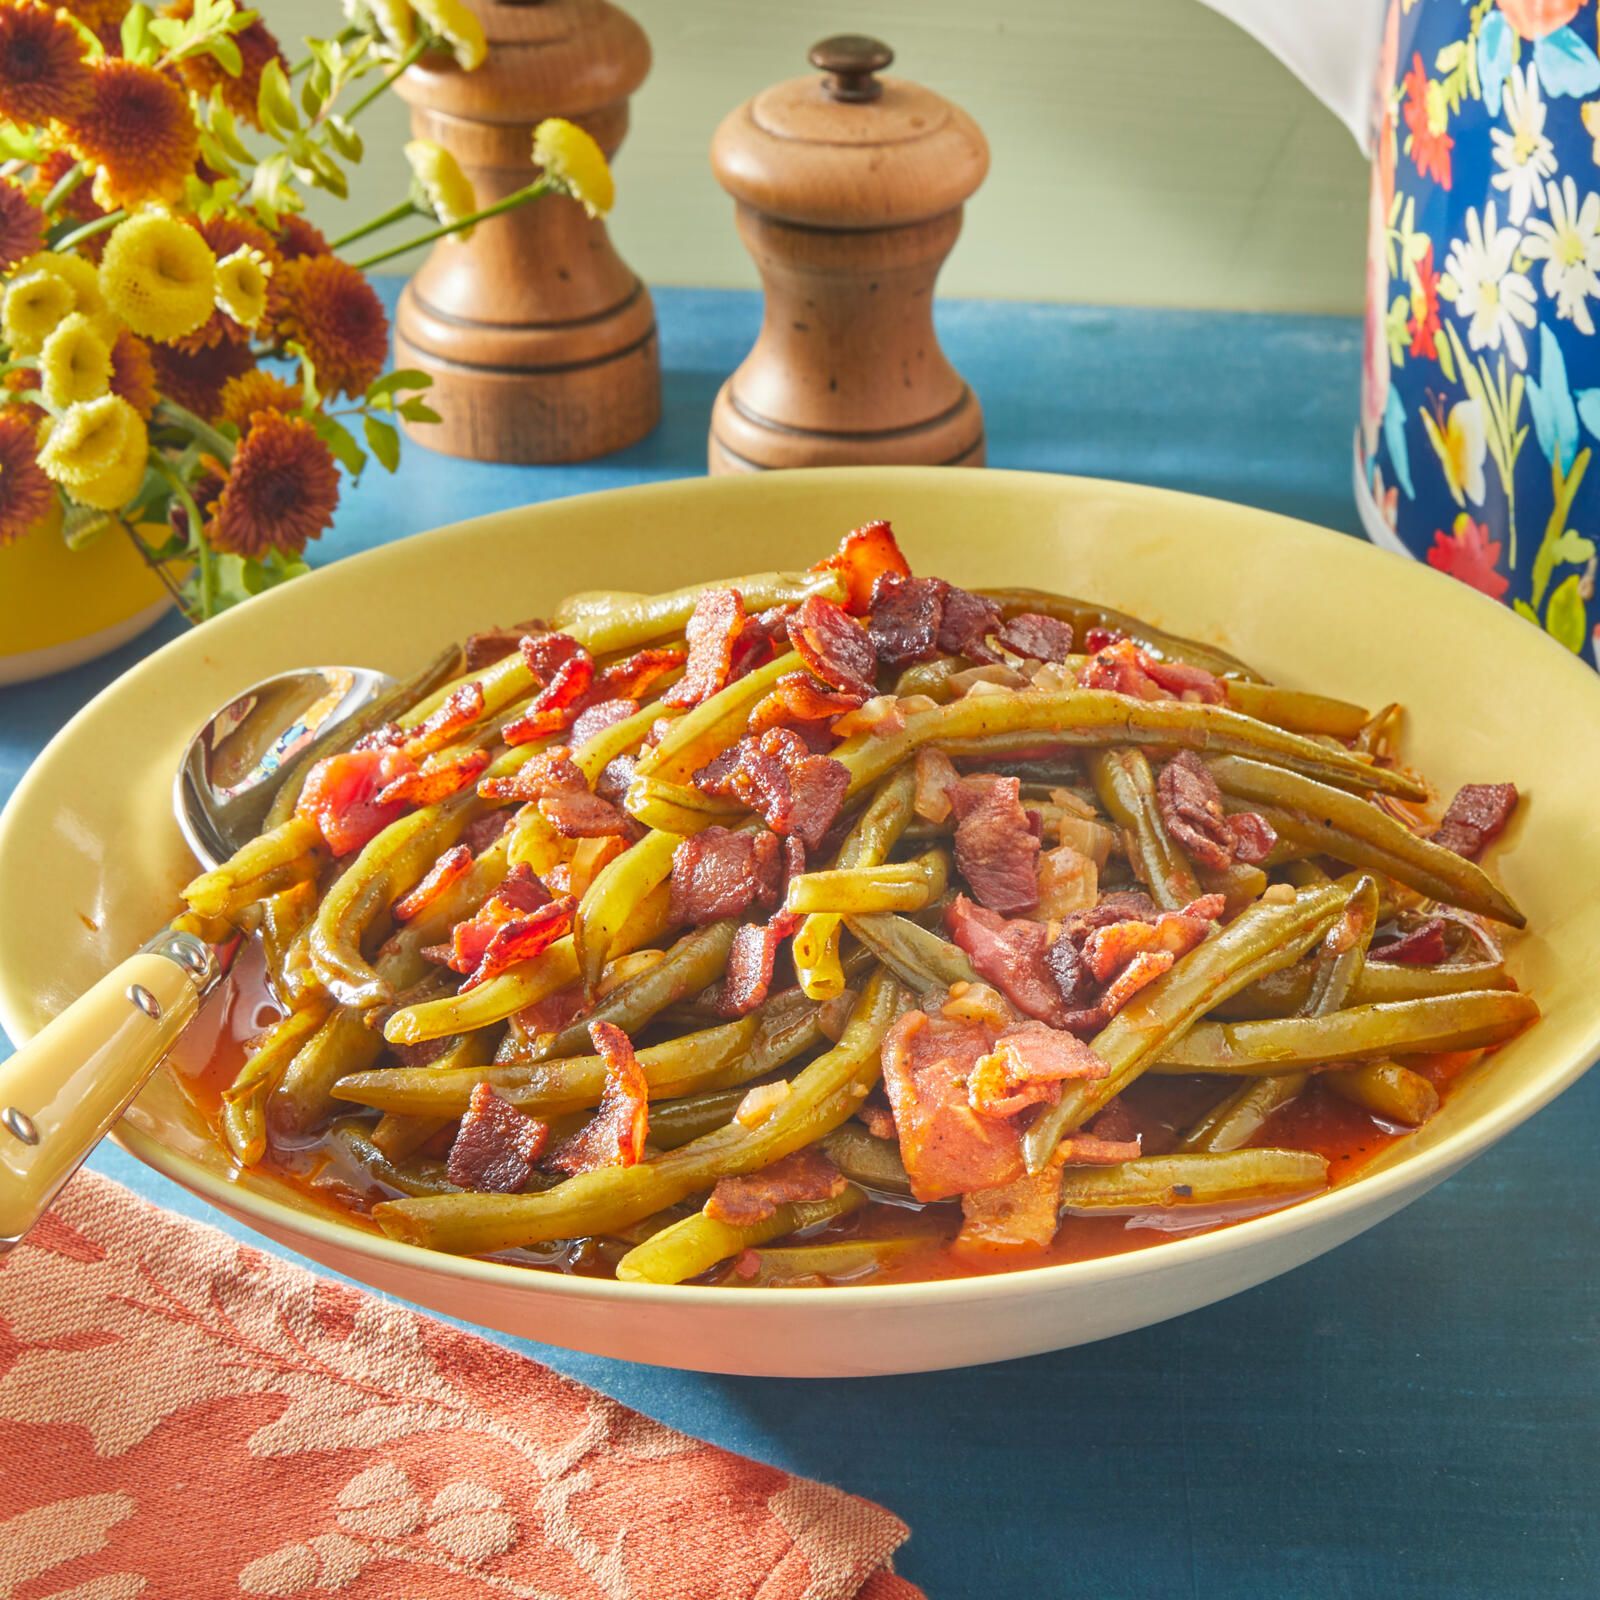 Slow Cooked Green Beans Tender Healthy And Delicious